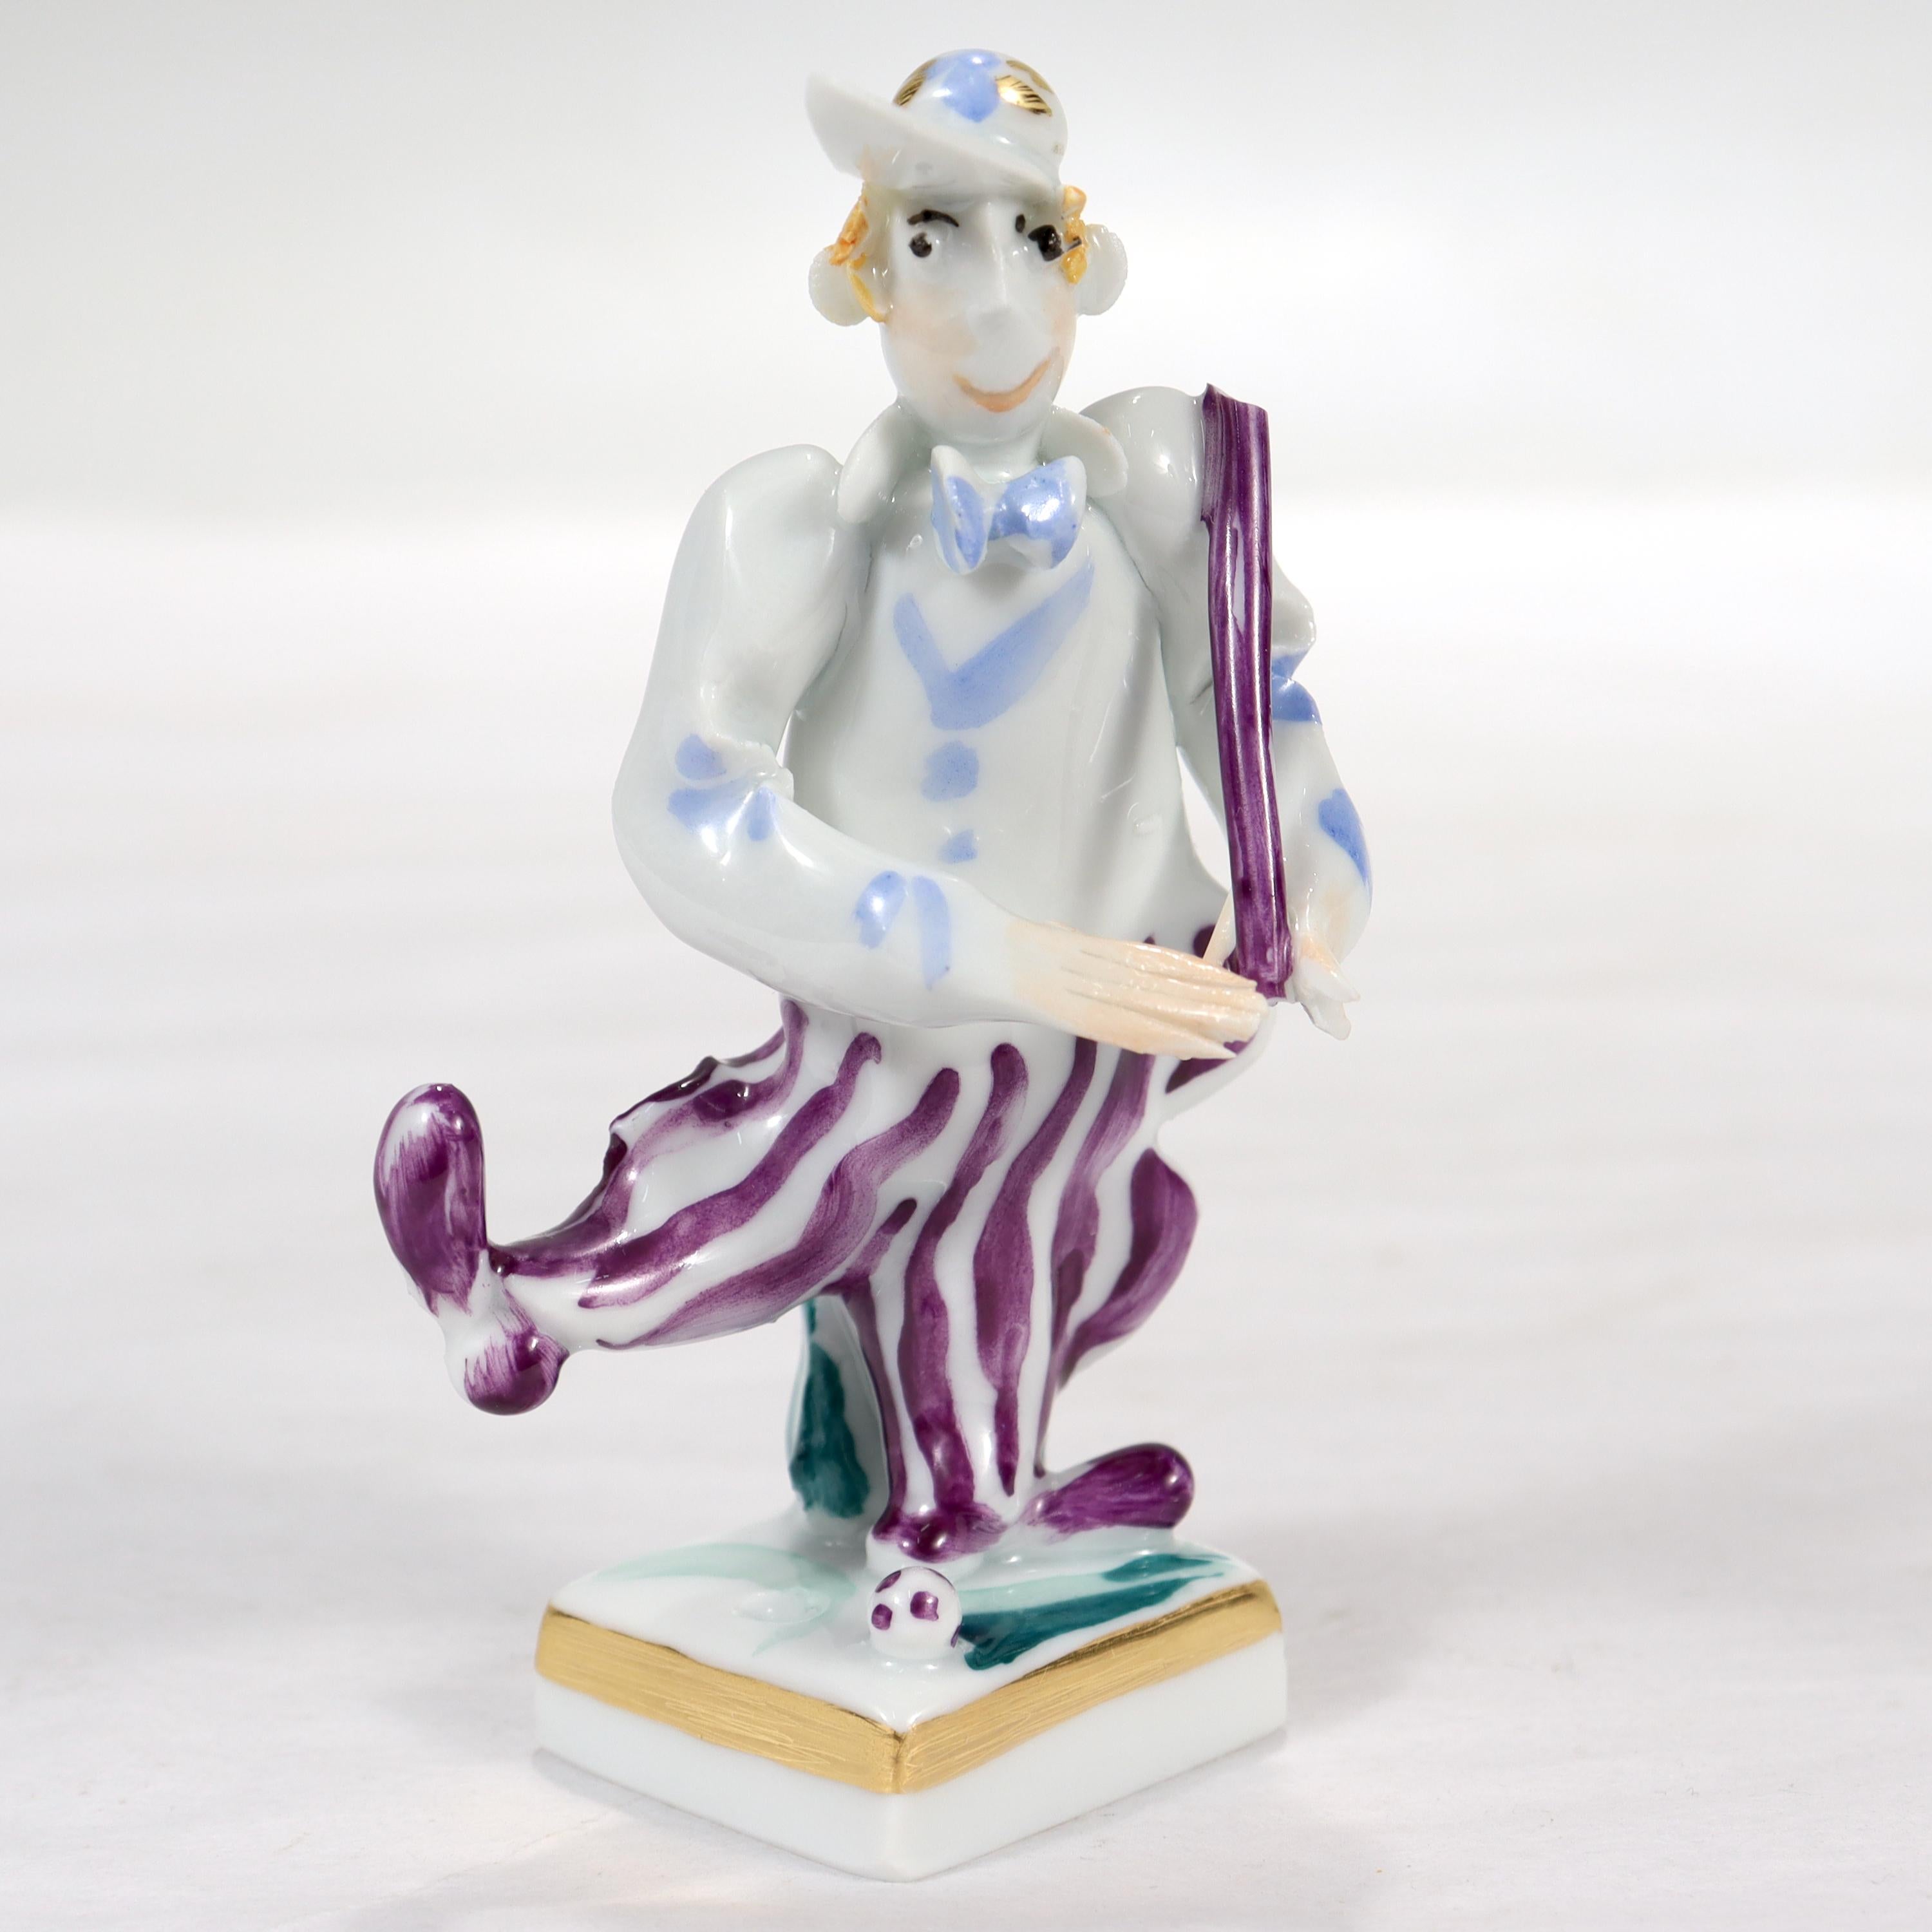 A fine Meissen porcelain miniature or figurine.

By Peter Strang. Strang was born in Dresden in 1935 and received a degree in Sculpture from the Academy of Fine Arts in Dresden in 1960. Peter was a founding member of the Meissen 1960 artists'